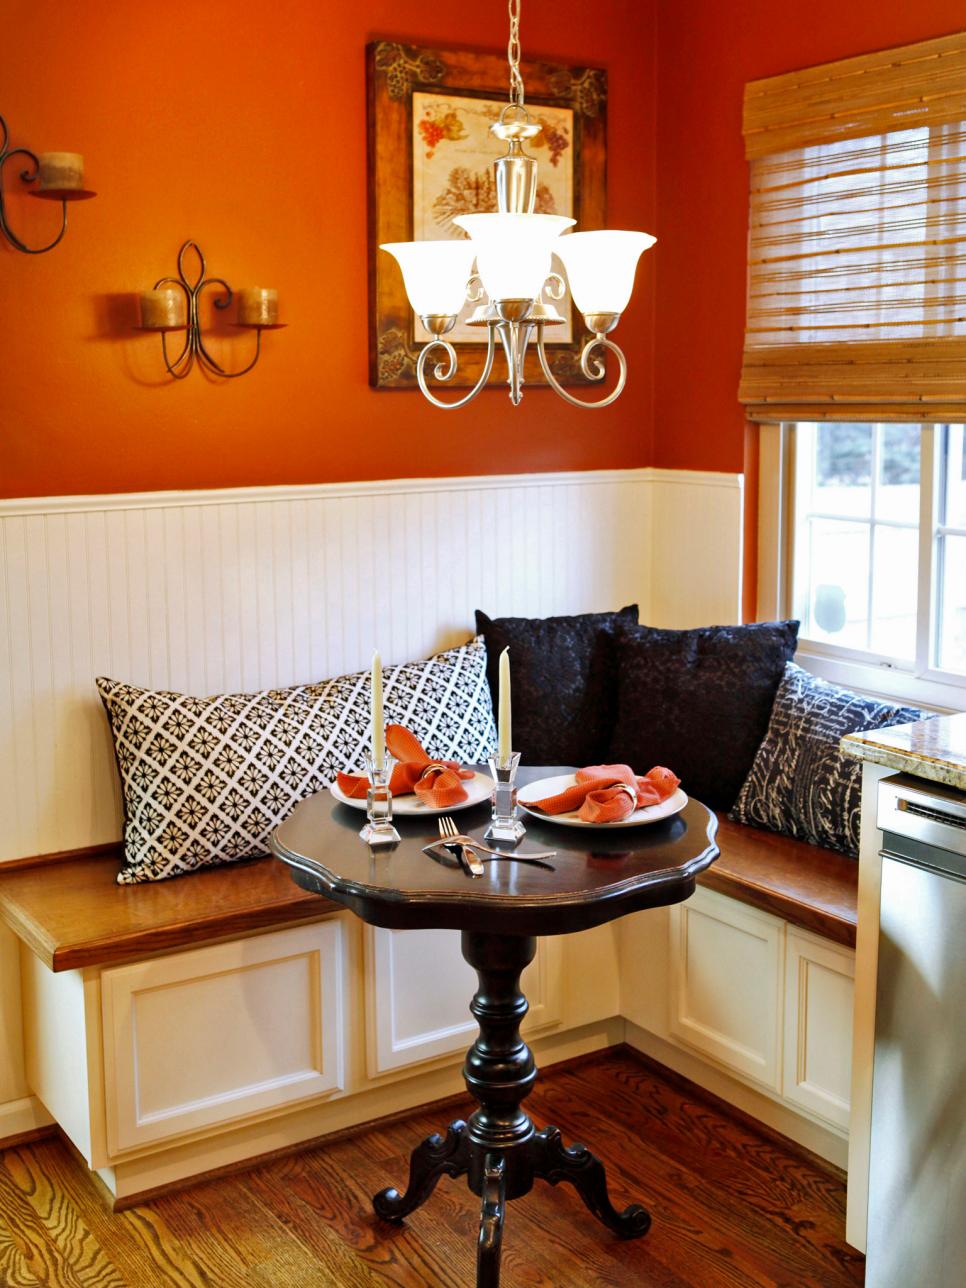 kitchen small eat hgtv into turning kitchens banquette rooms